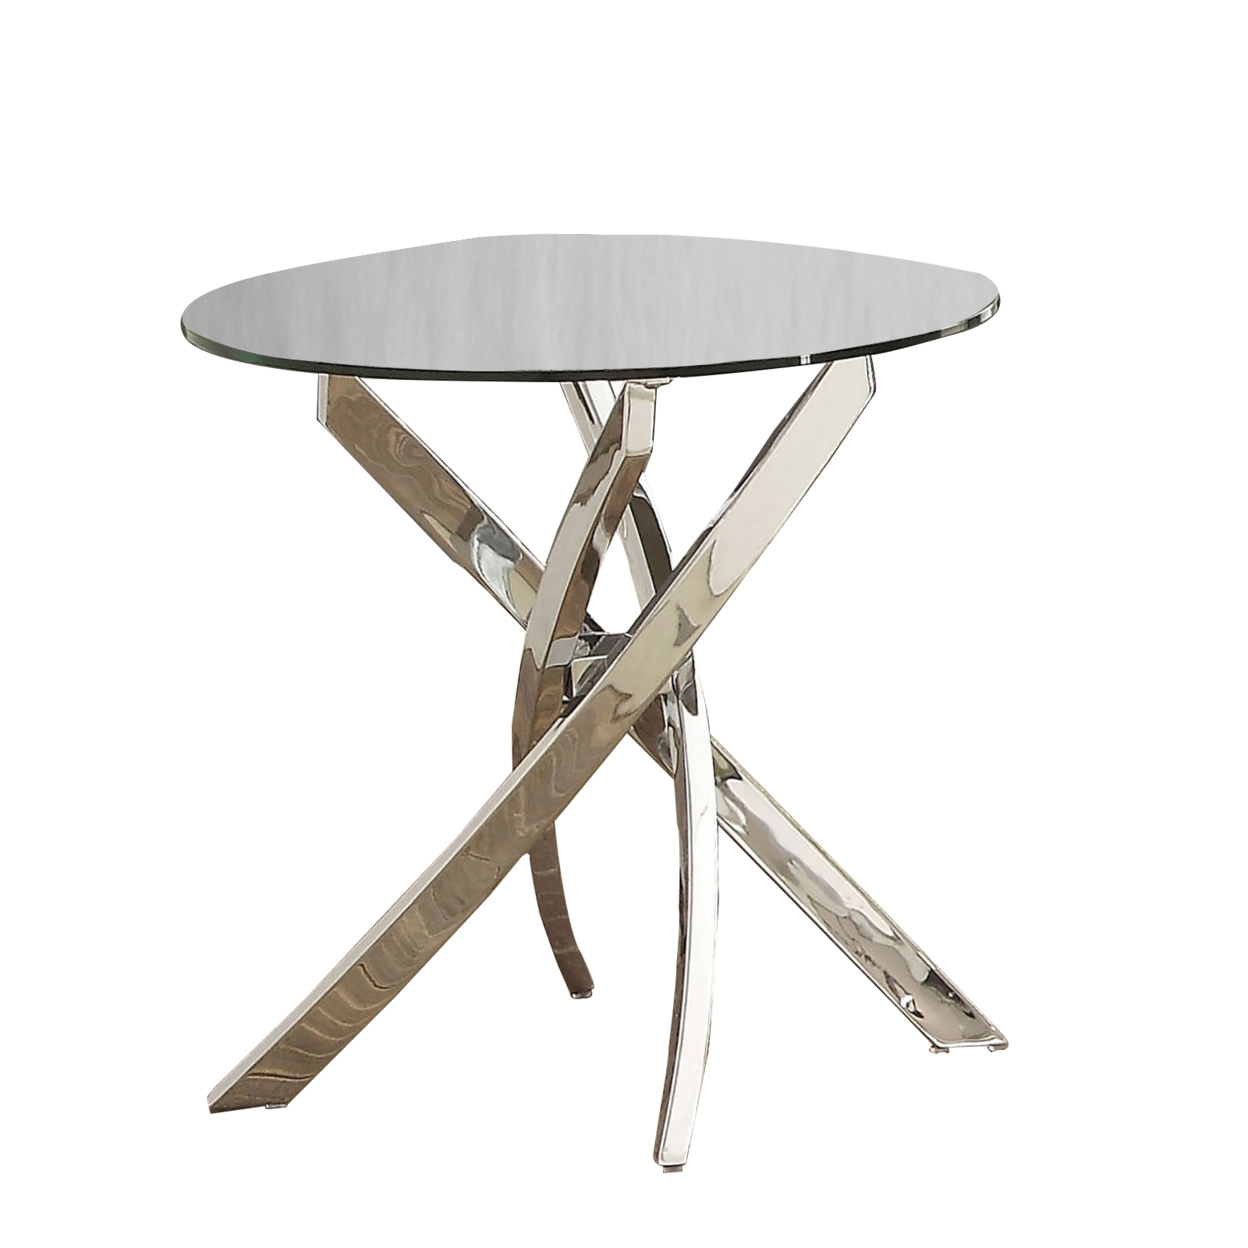 Round Glass Top End Table With Criss Cross Metal Base, Silver- Saltoro Sherpi